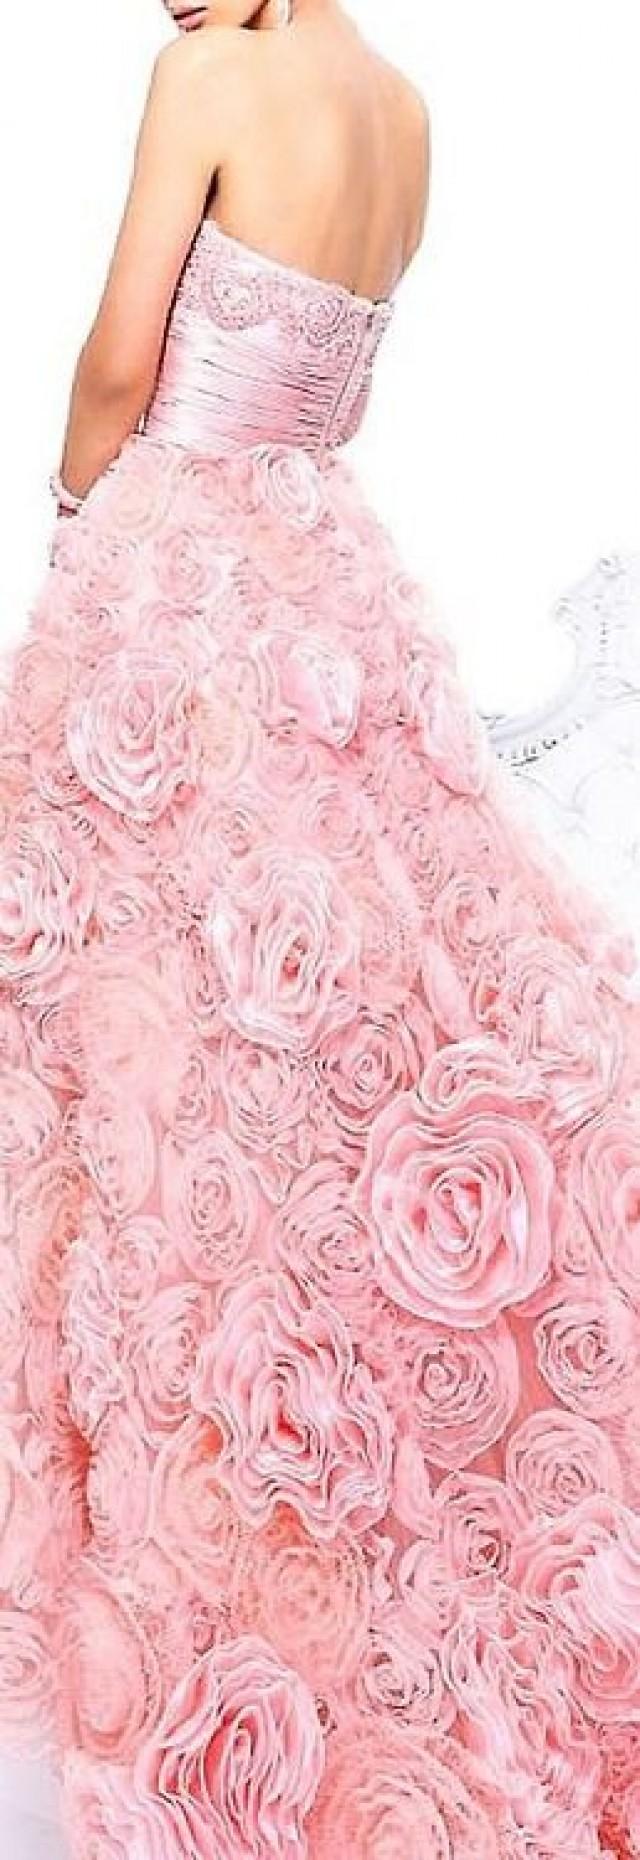 wedding photo - Gowns.....Pastel Pinks for wedding